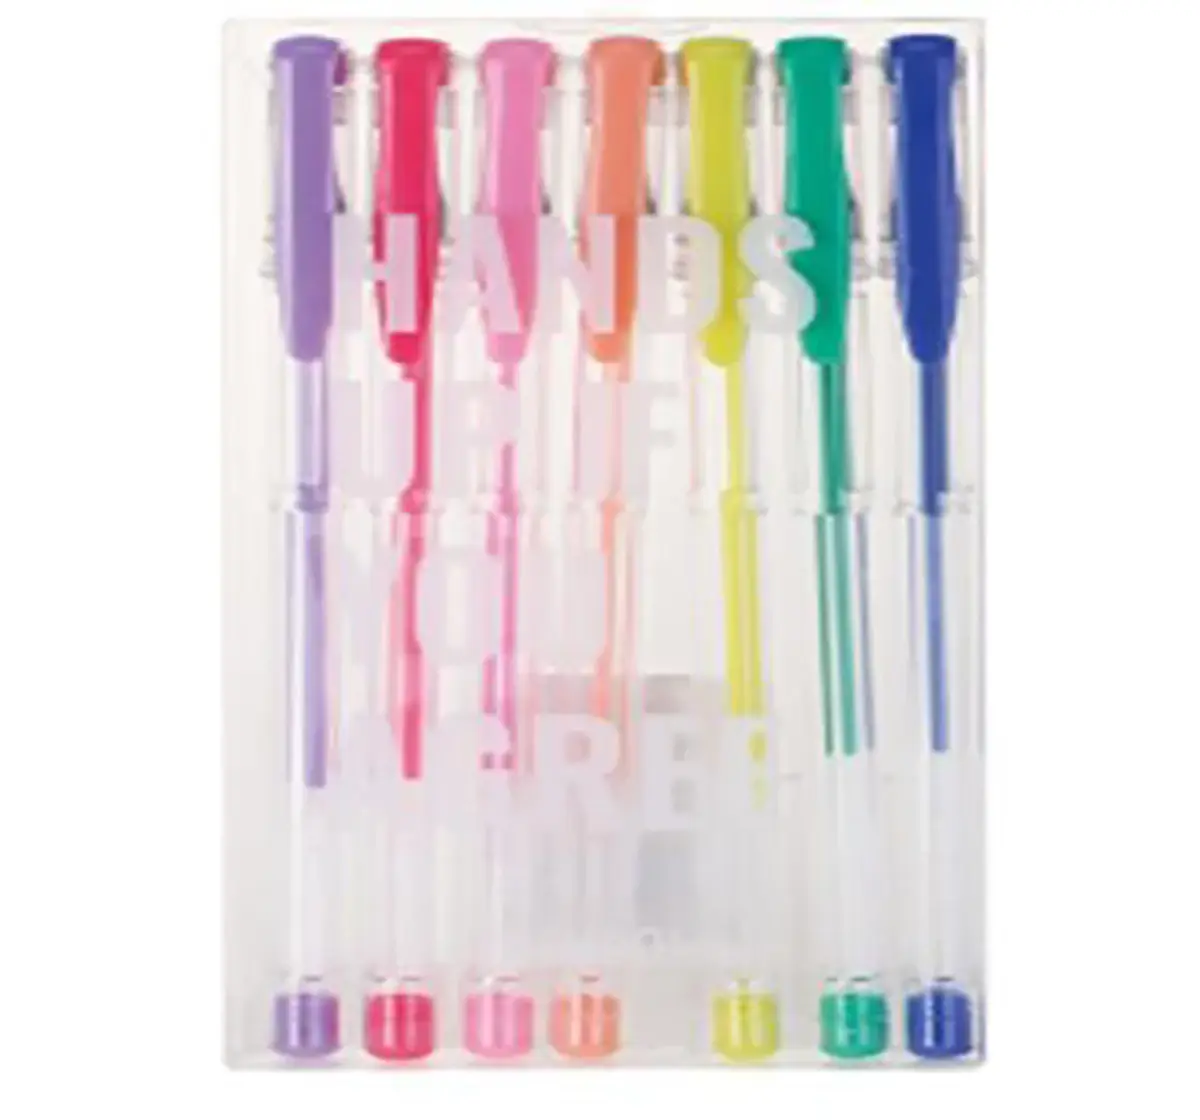 Syloon Rainbow Gel Pens Set Of 7 School Stationery for Kids age 3Y+ 